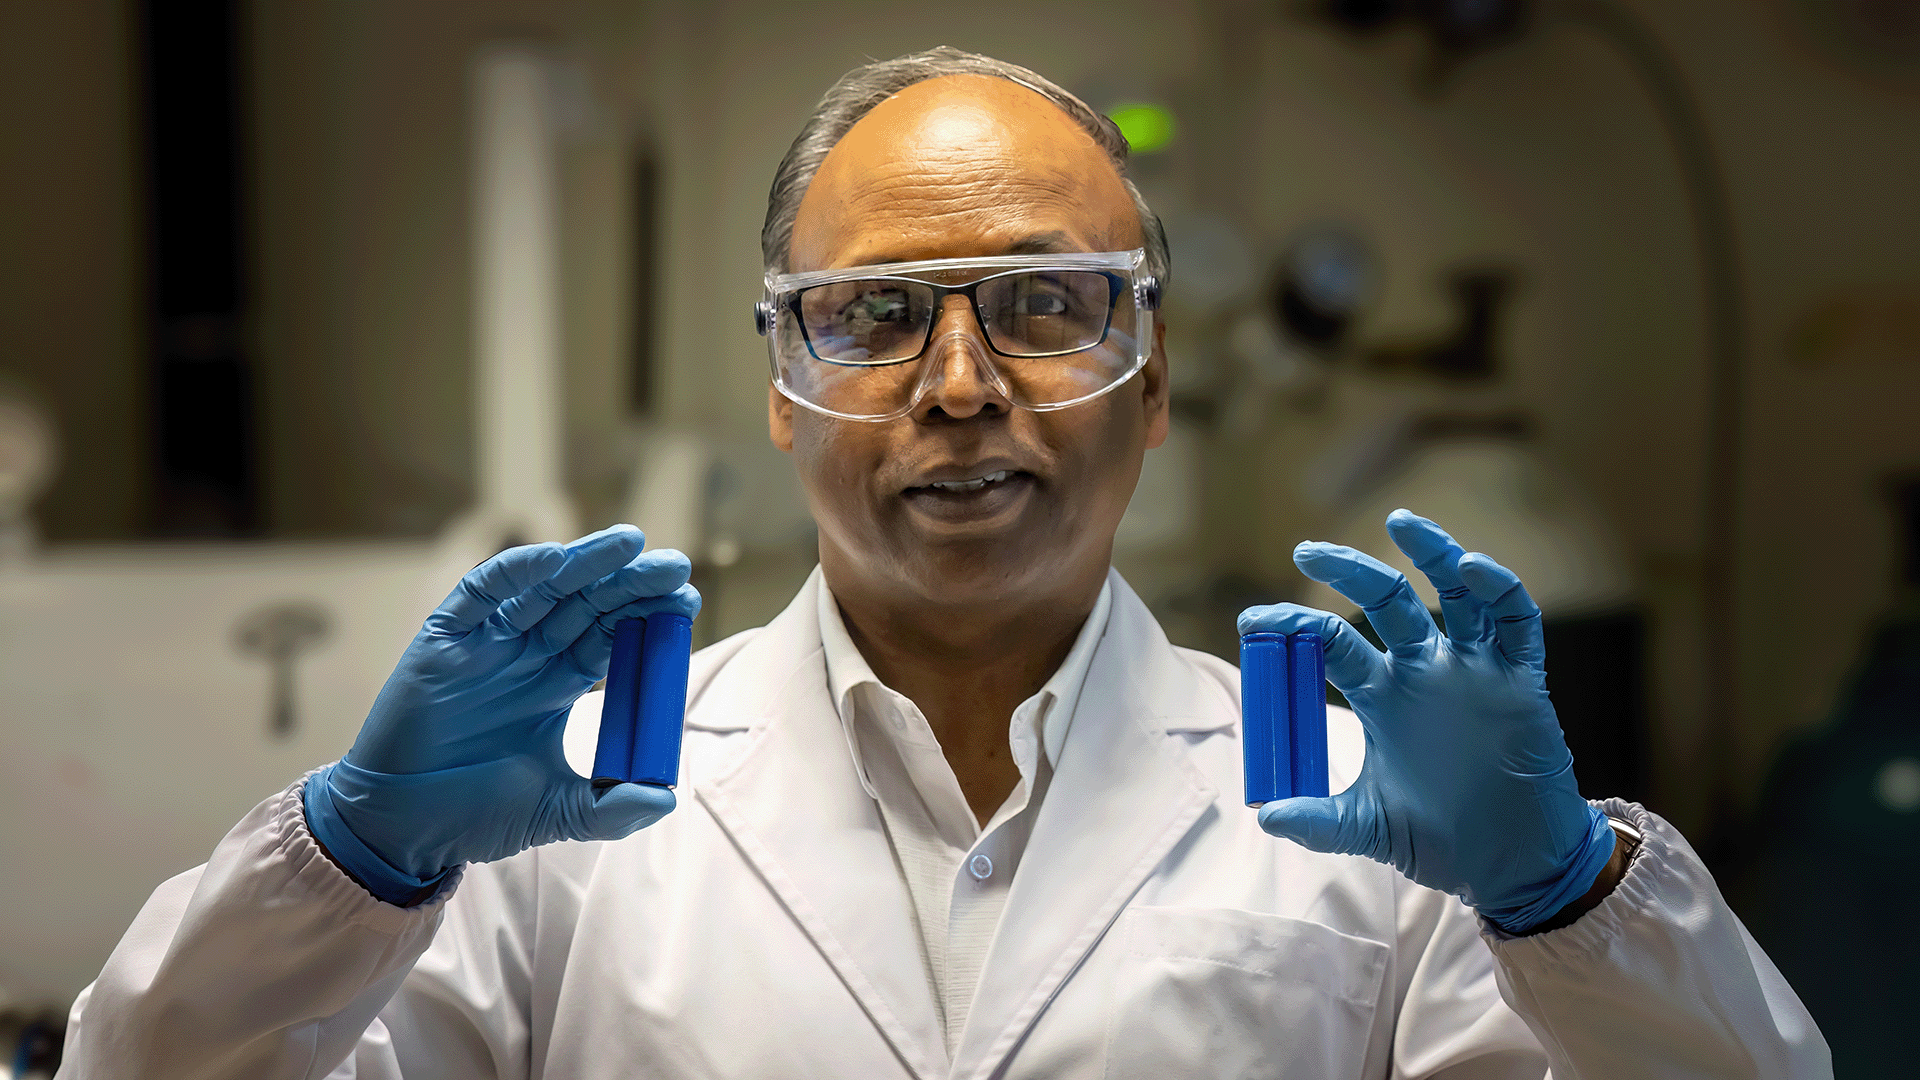 Assoc Prof Balaya says sodium-ion batteries can be both safer than lithium-ion devices, but are also just as long-lasting and highly reliable.